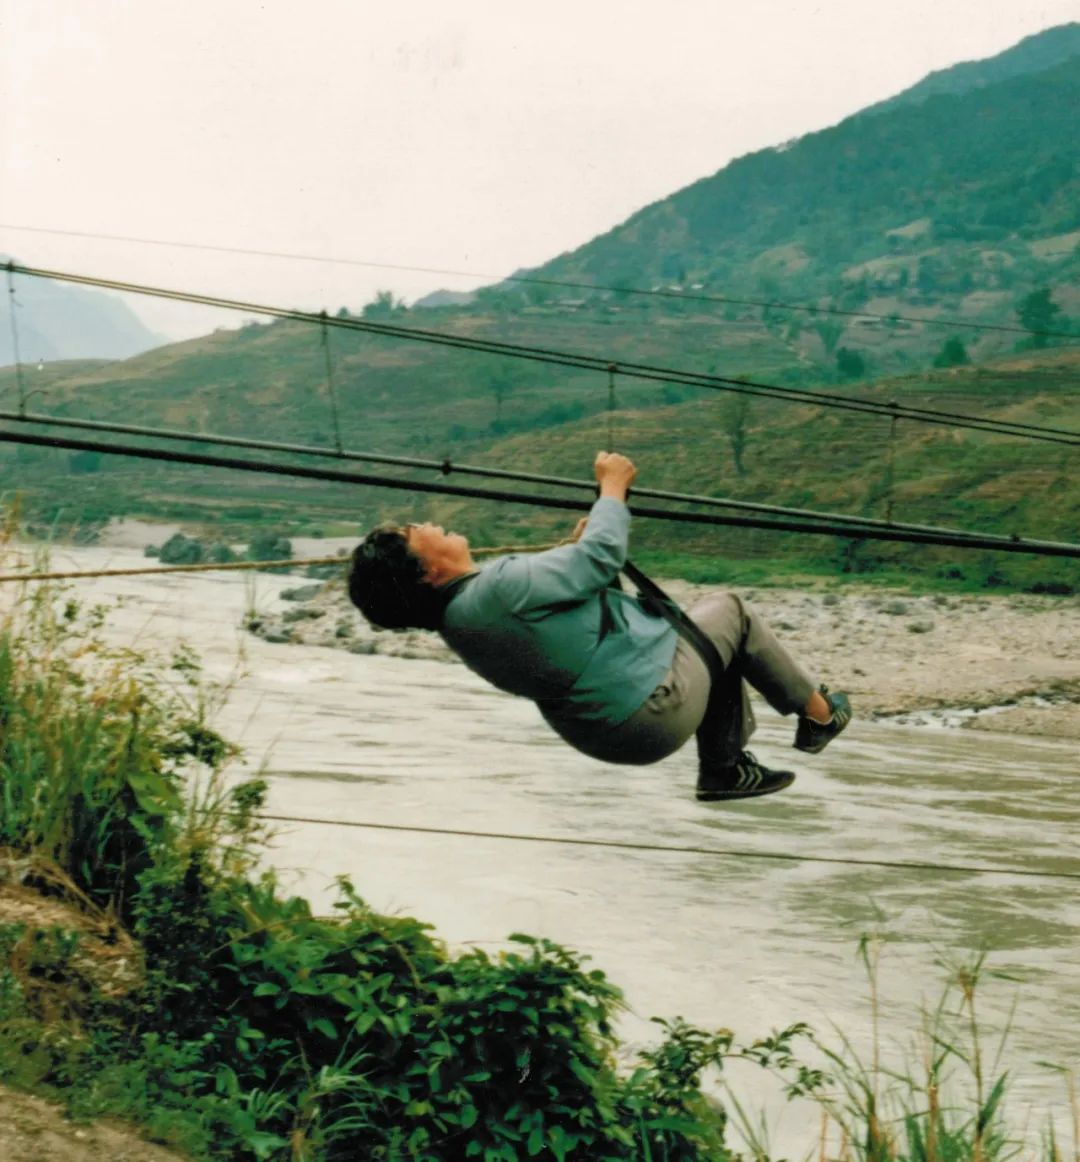 Li Huanying climbs a cable above a river in southwest China. /CMG